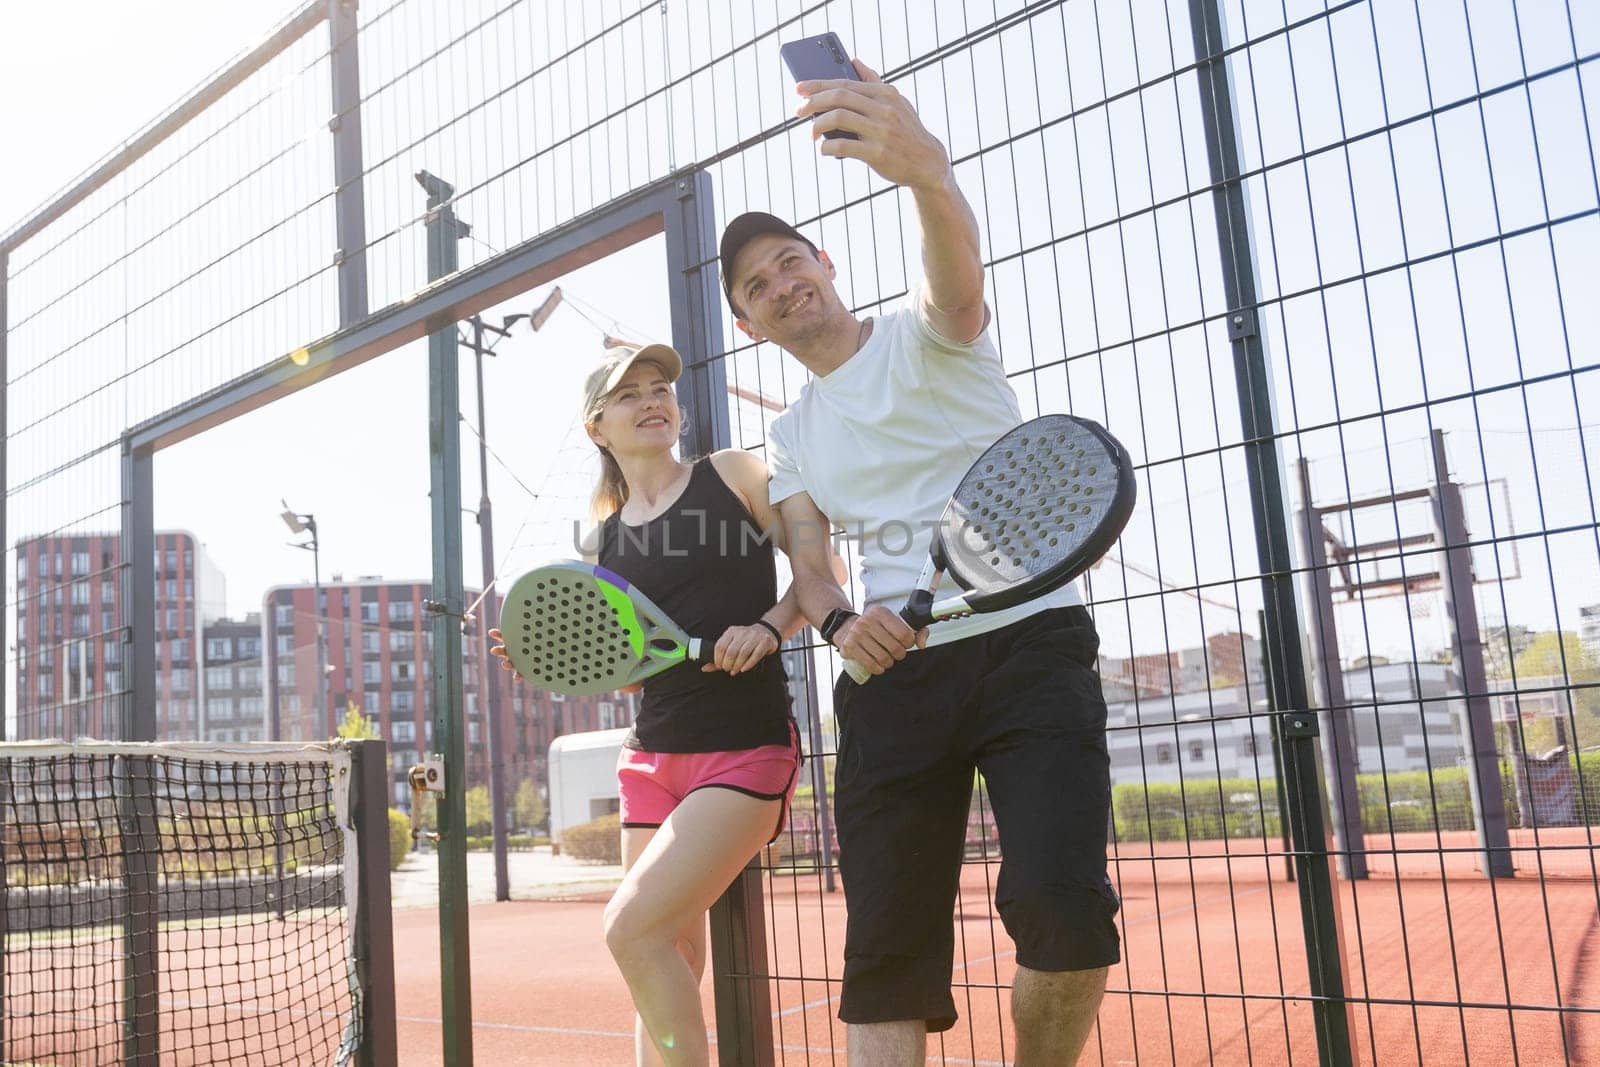 young woman playing Padel Tennis with partner in the open air tennis court. High quality photo